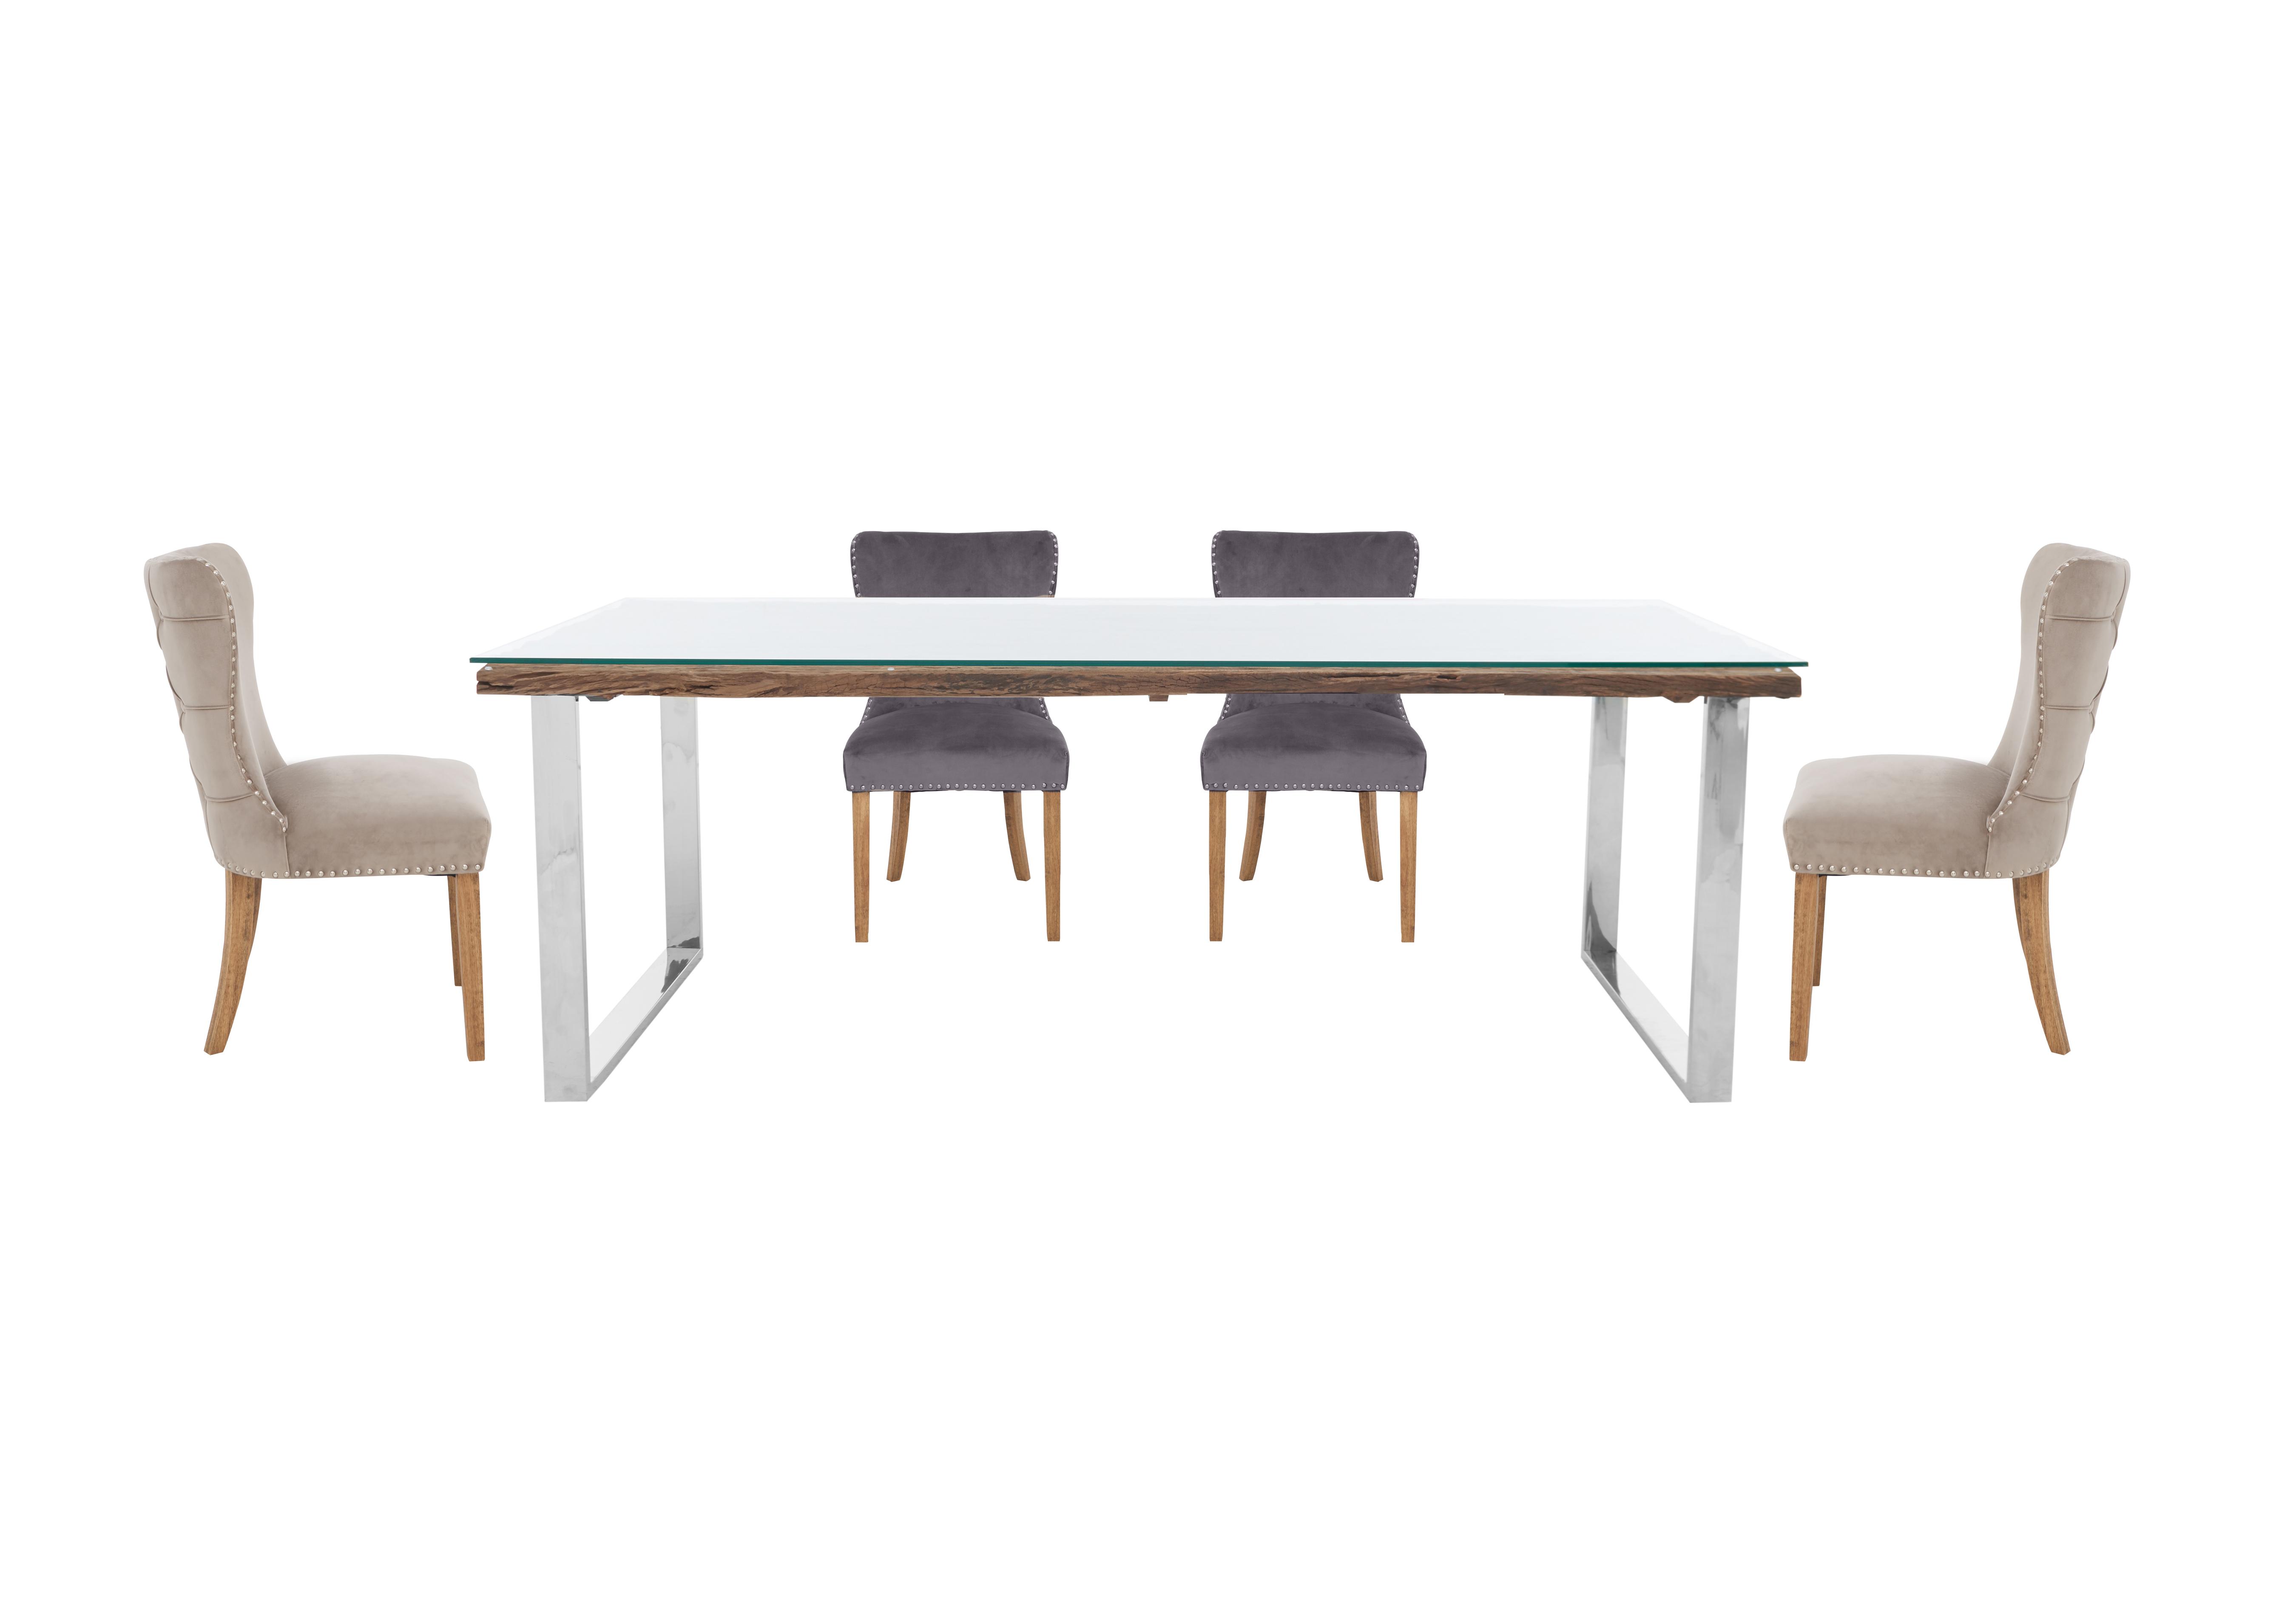 Chennai Dining Table with U-Leg Base and 4 Luxe Dining Chairs in Grey / Taupe on Furniture Village